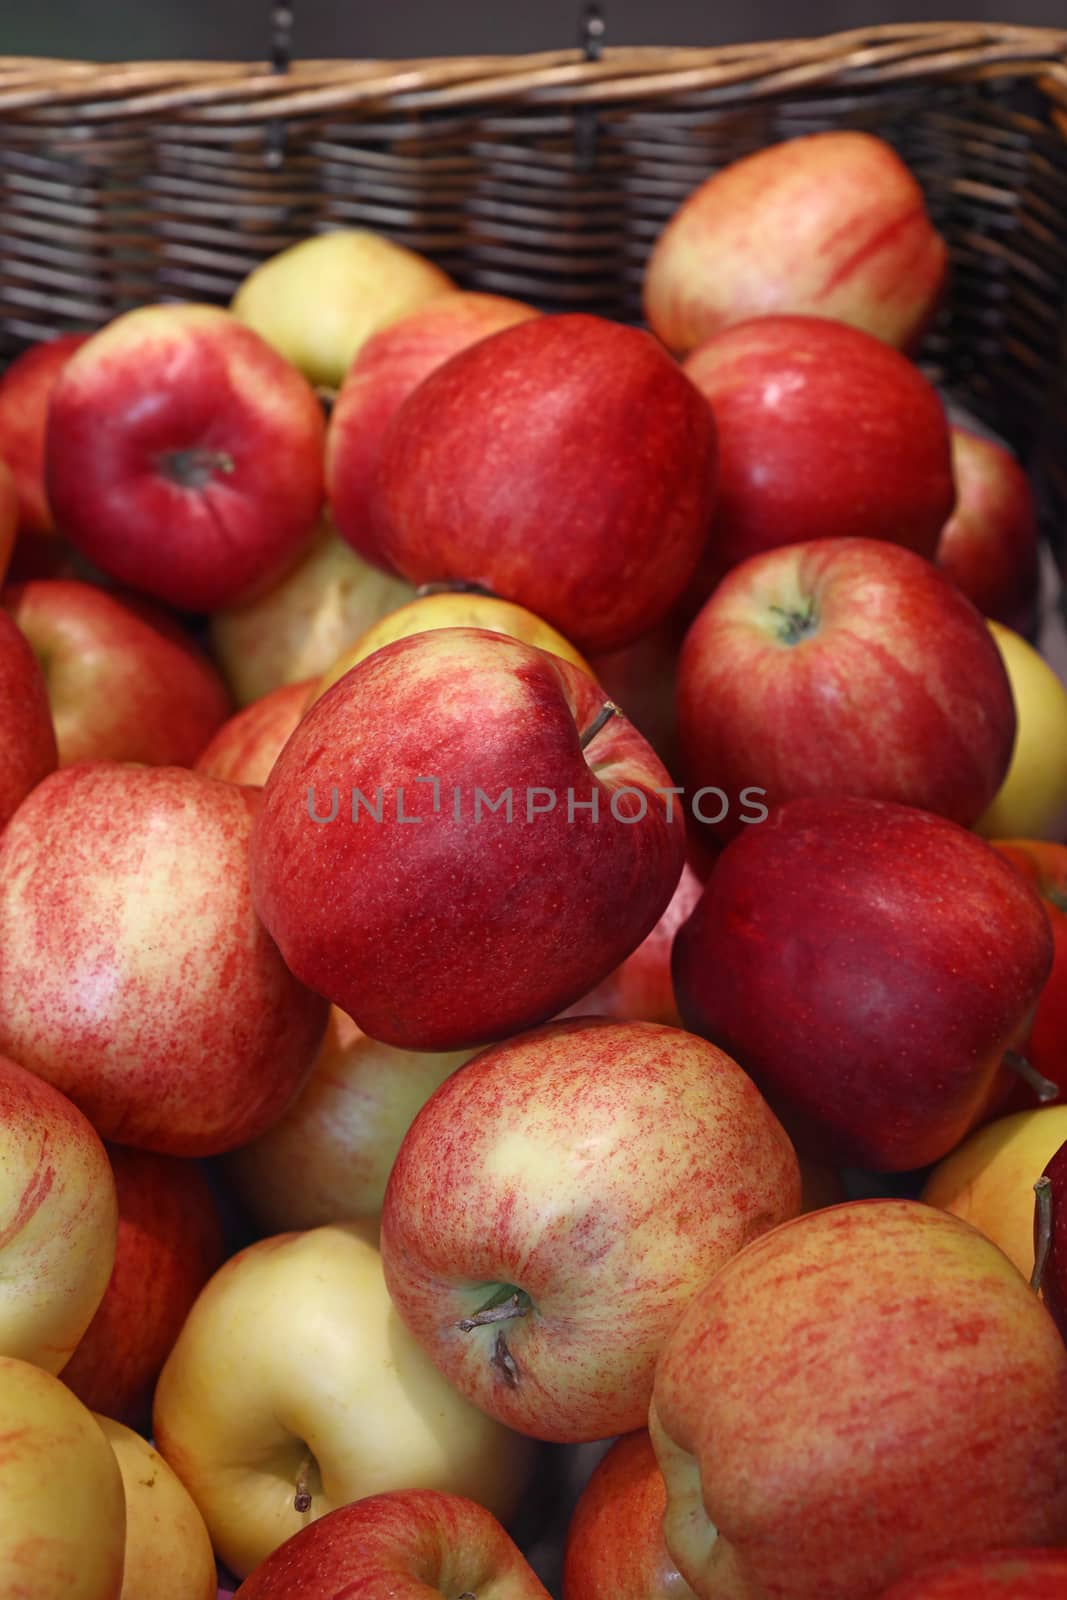 Heap of fresh red and yellow ripe apples in wicker wooden basket on retail market stall display, close up, high angle view